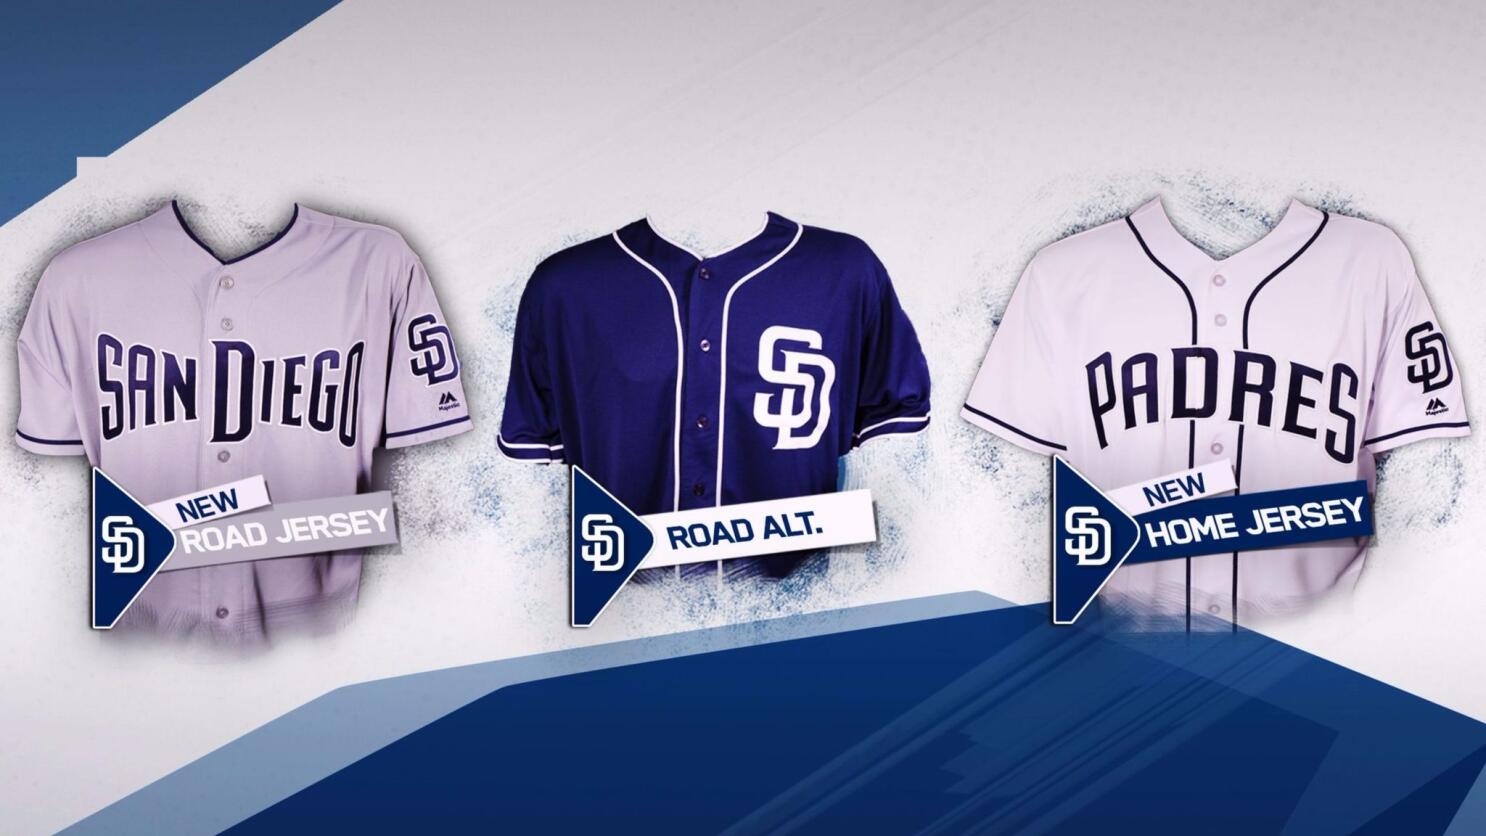 San Diego Padres unveil new home-and-road uniforms for 2017 –  SportsLogos.Net News